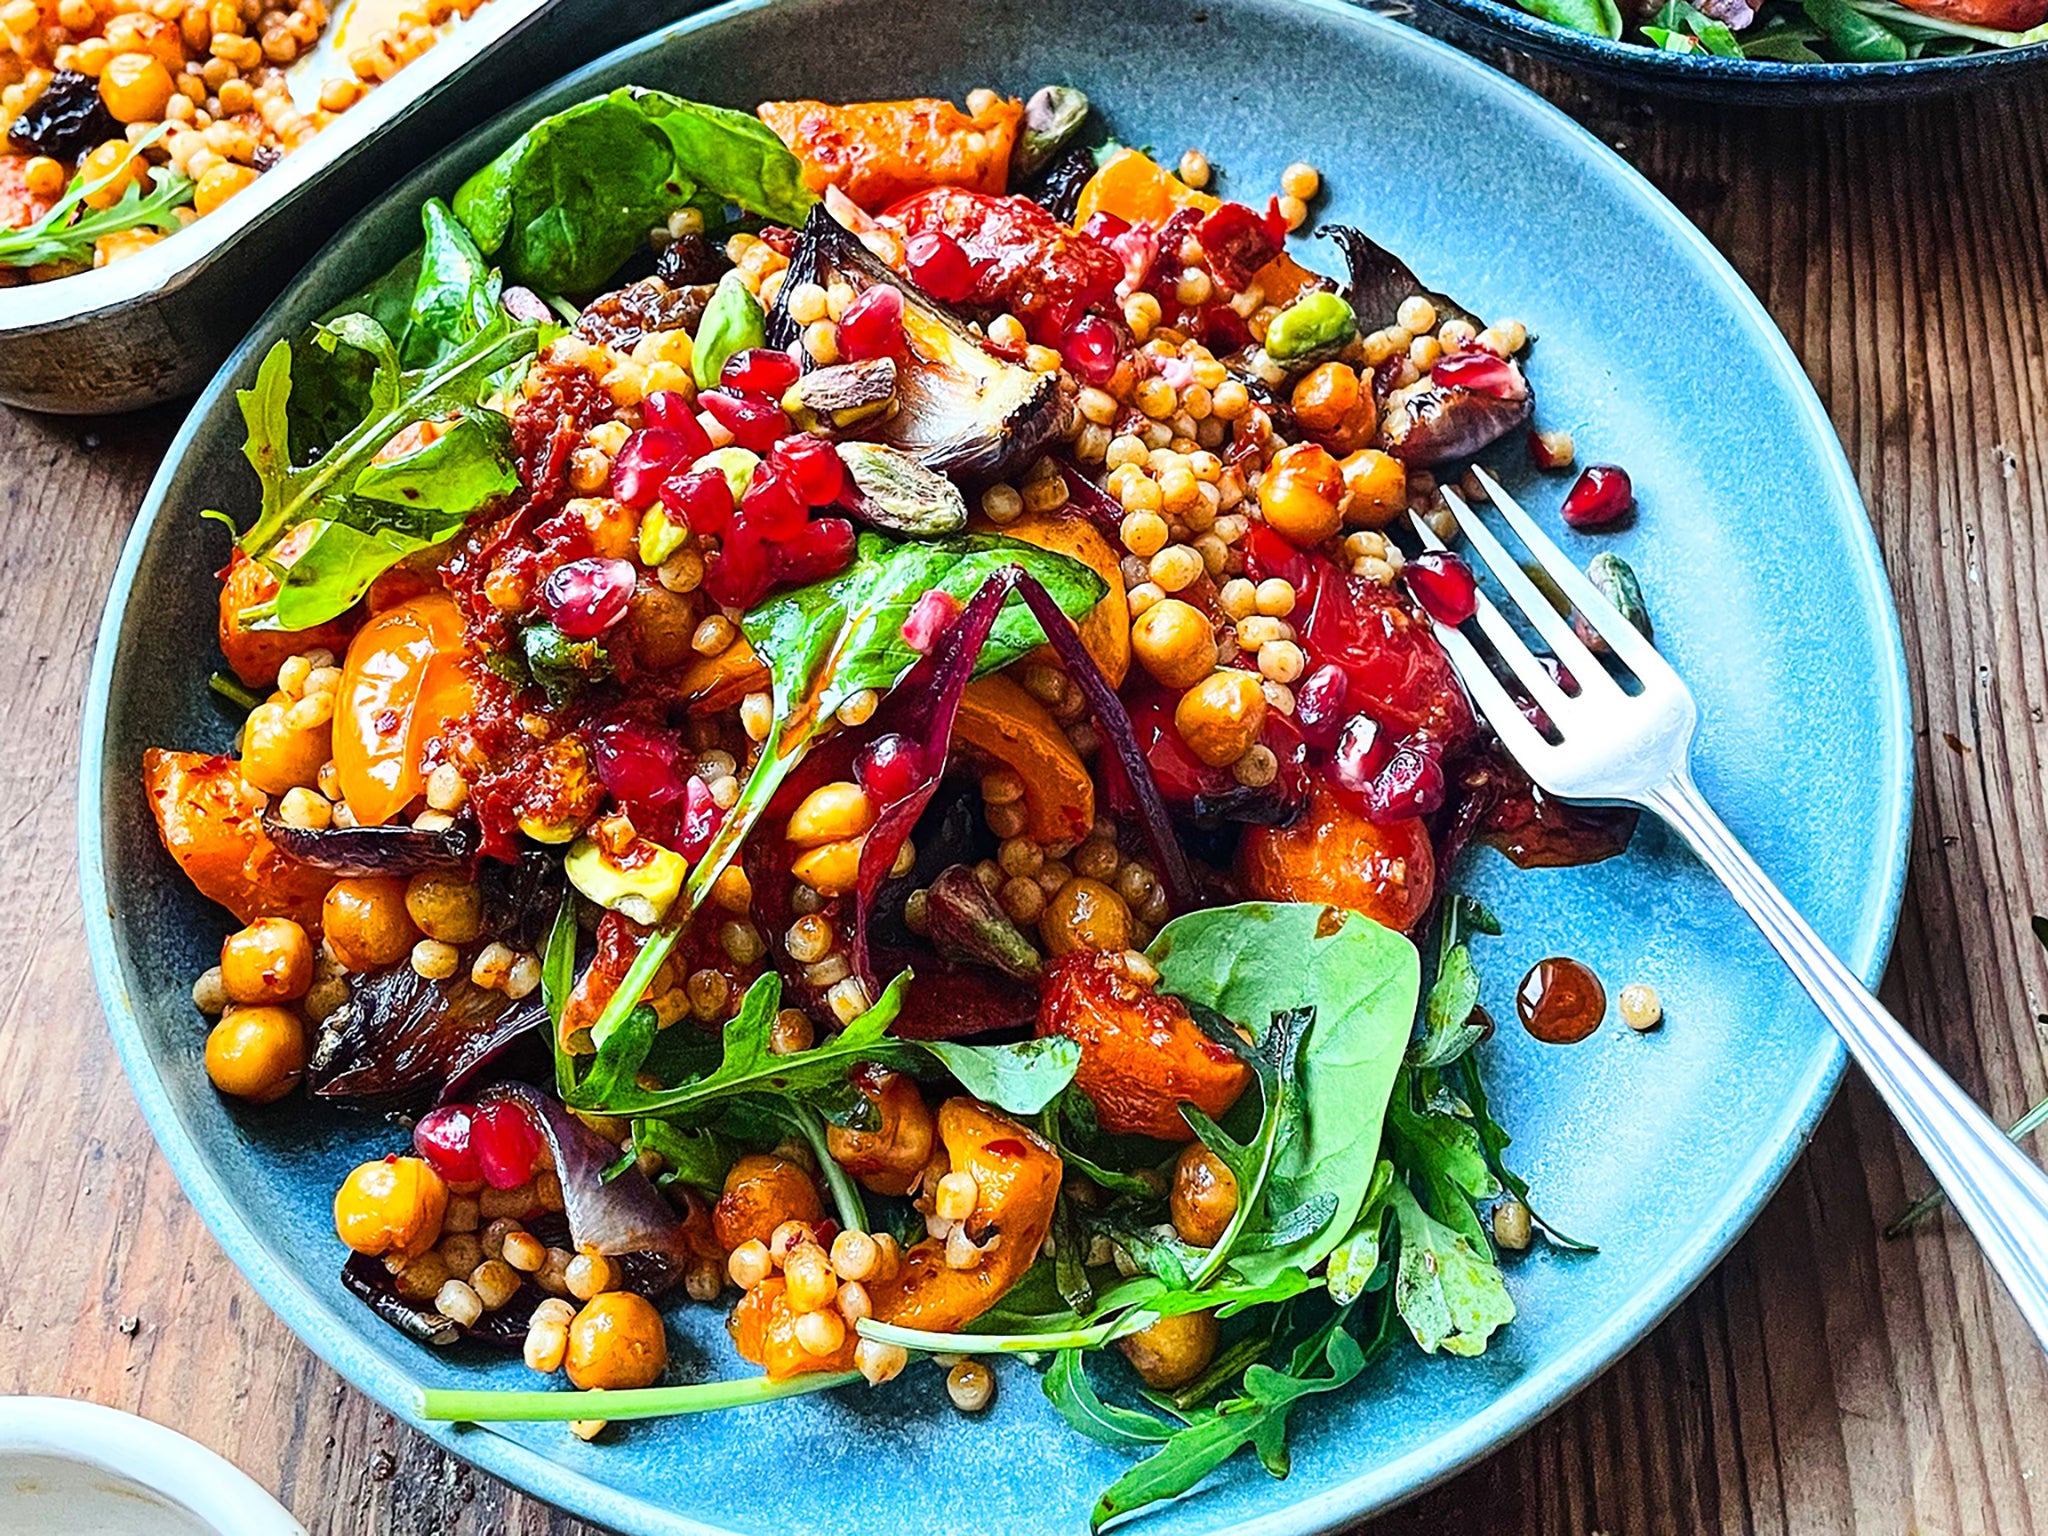 Packed with peppers, carrots and sweet potato, this Moroccan salad maximises your beta-carotene levels